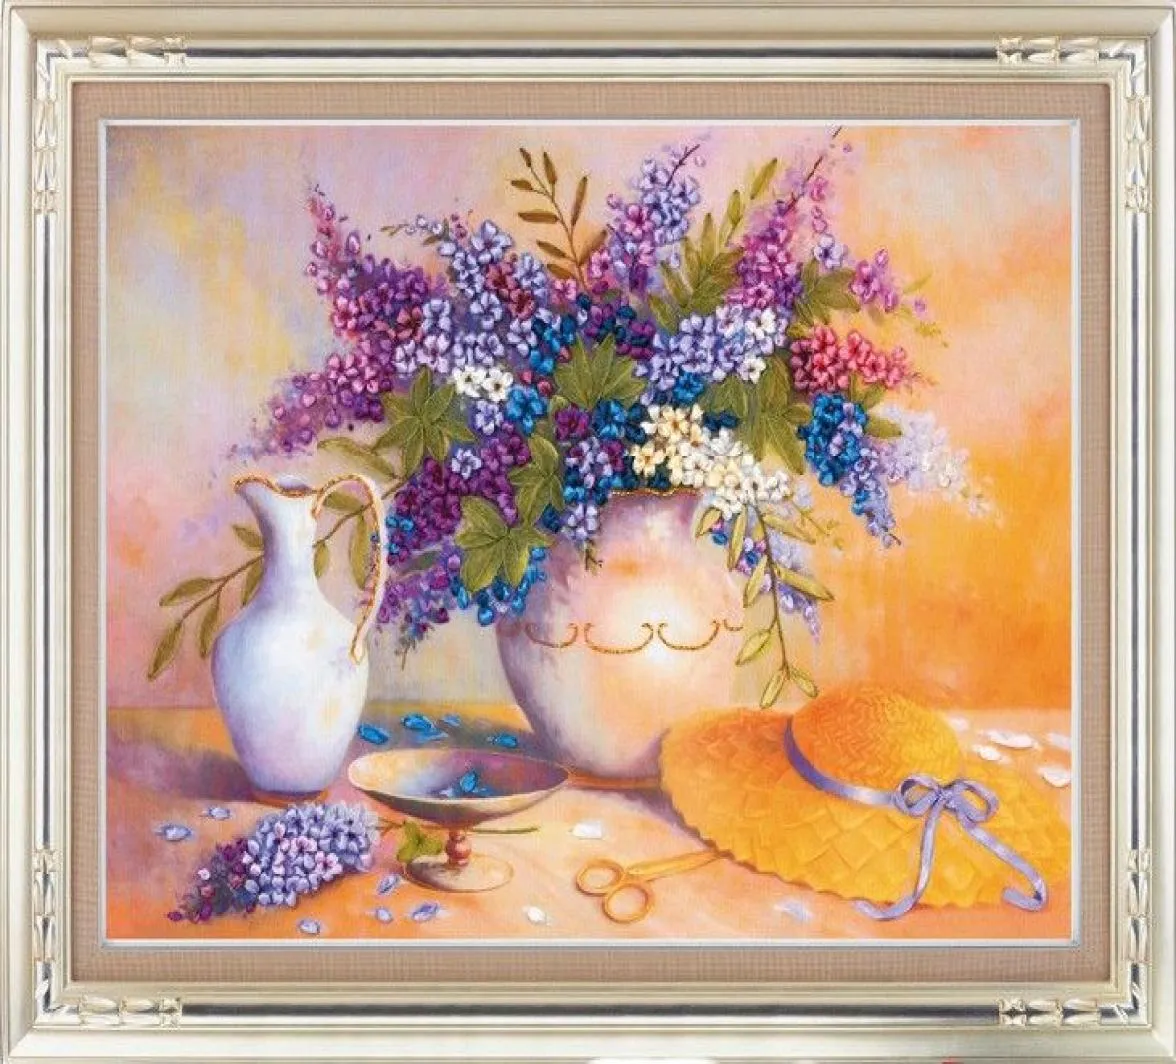 New Arrival Unfinished 3D Ribbons Embroidery Flower paintings Sets handmade needlework embroidery kits Lilac 50cmx65cm4217732